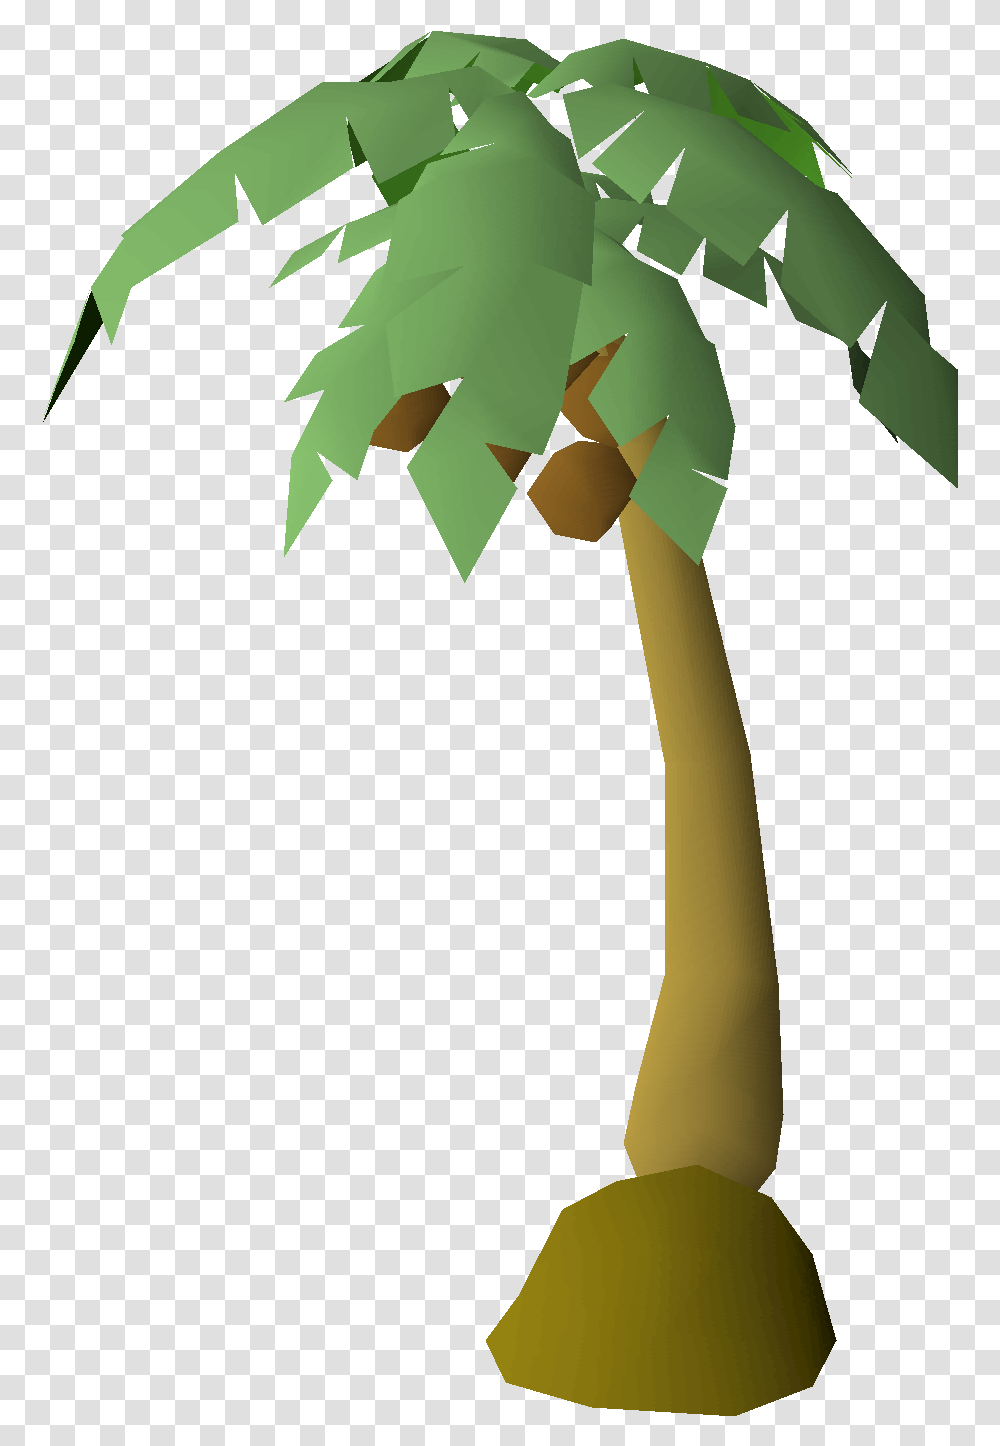 Date Tree Clip Art Download Full Size Clipart Palm Tree Cartoon, Plant, Leaf, Lamp, Green Transparent Png